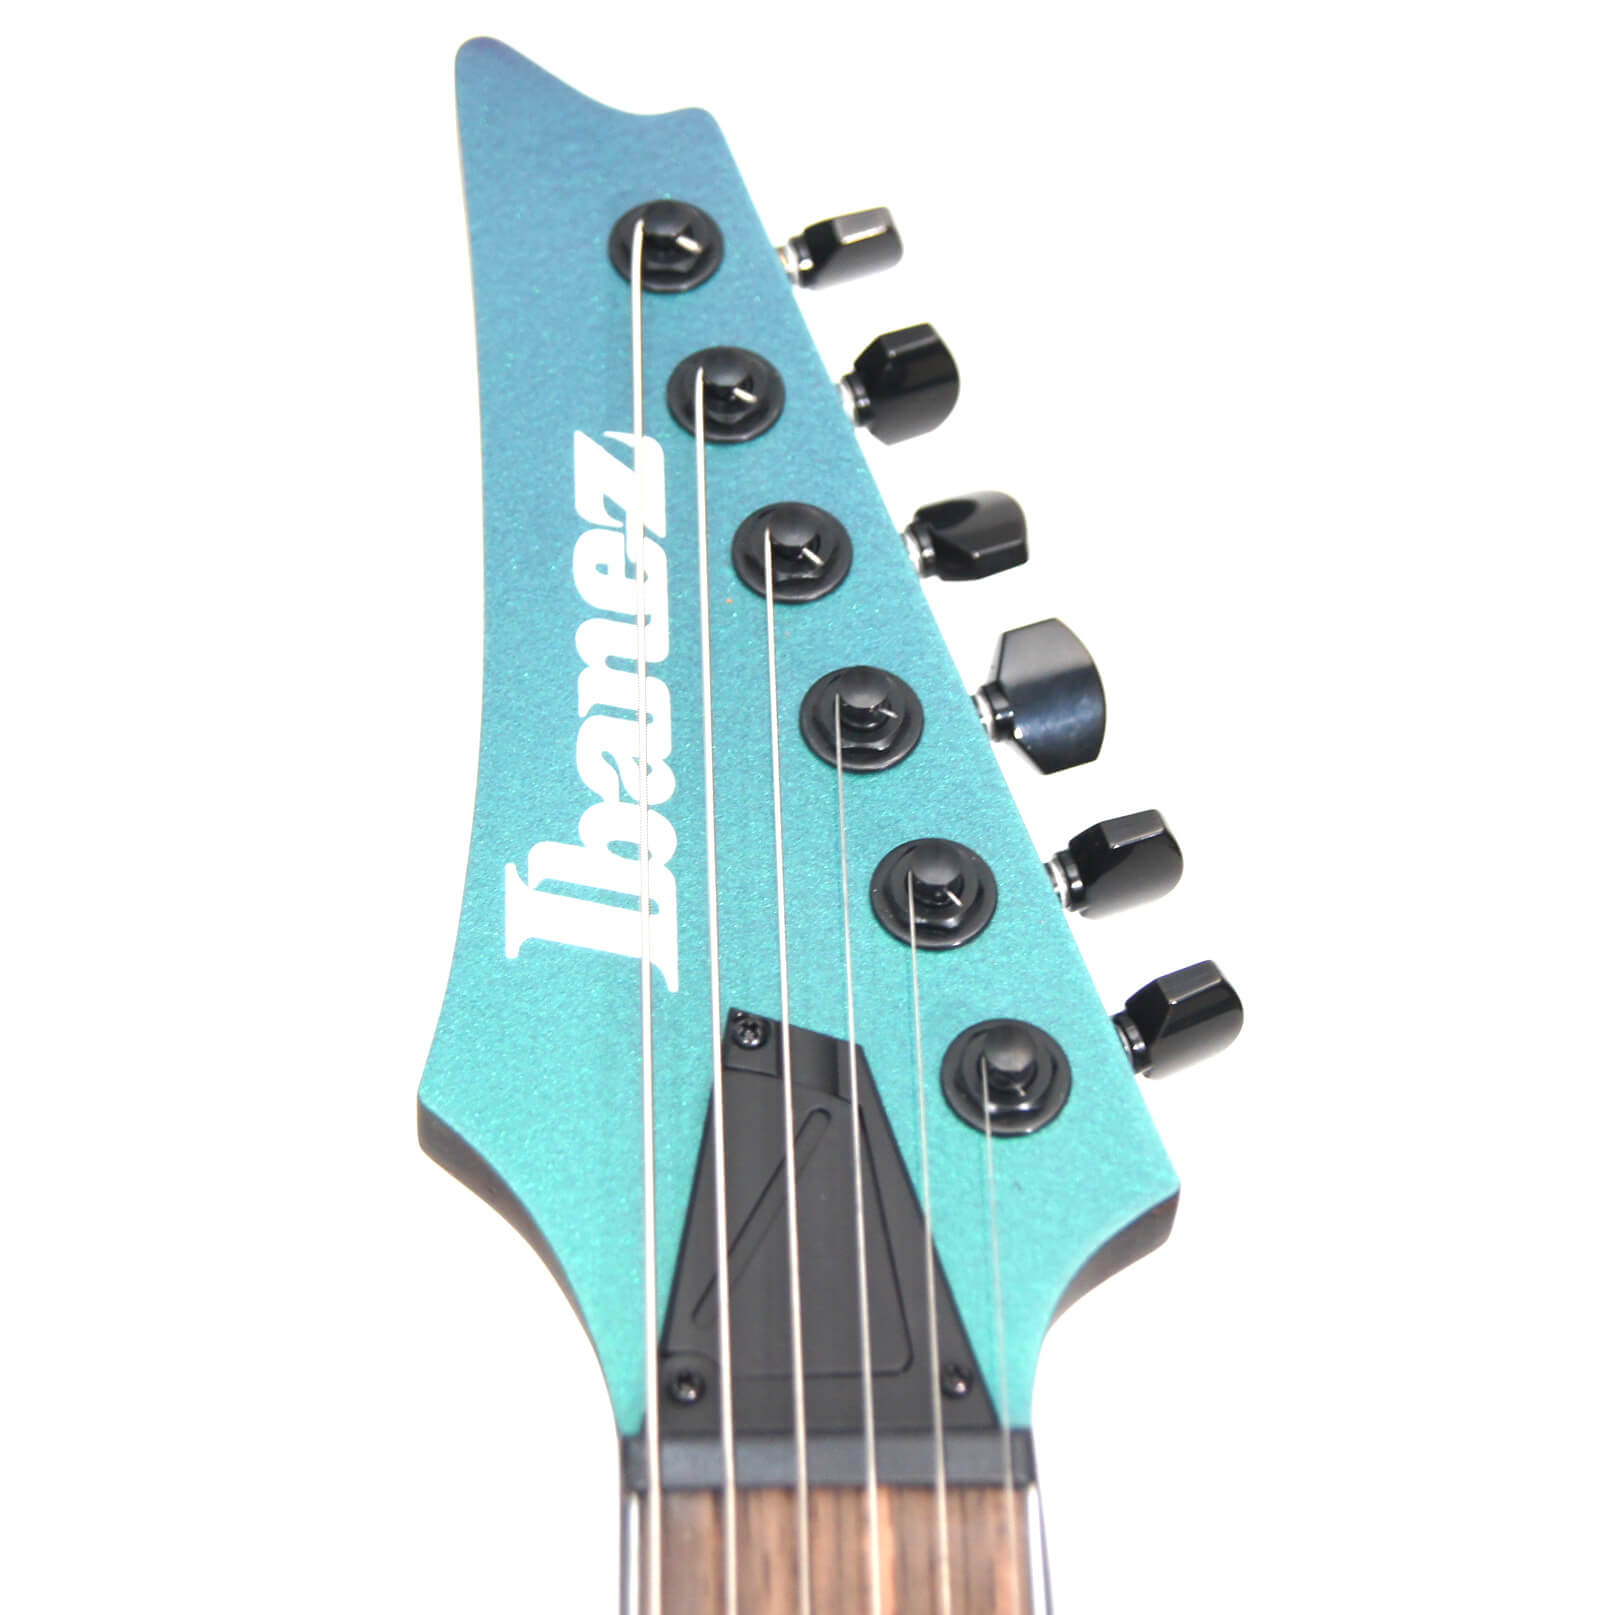 Ibanez S671ALBBCM Axion Label 6-String Electric Blue Chameleon Guitar-headstock